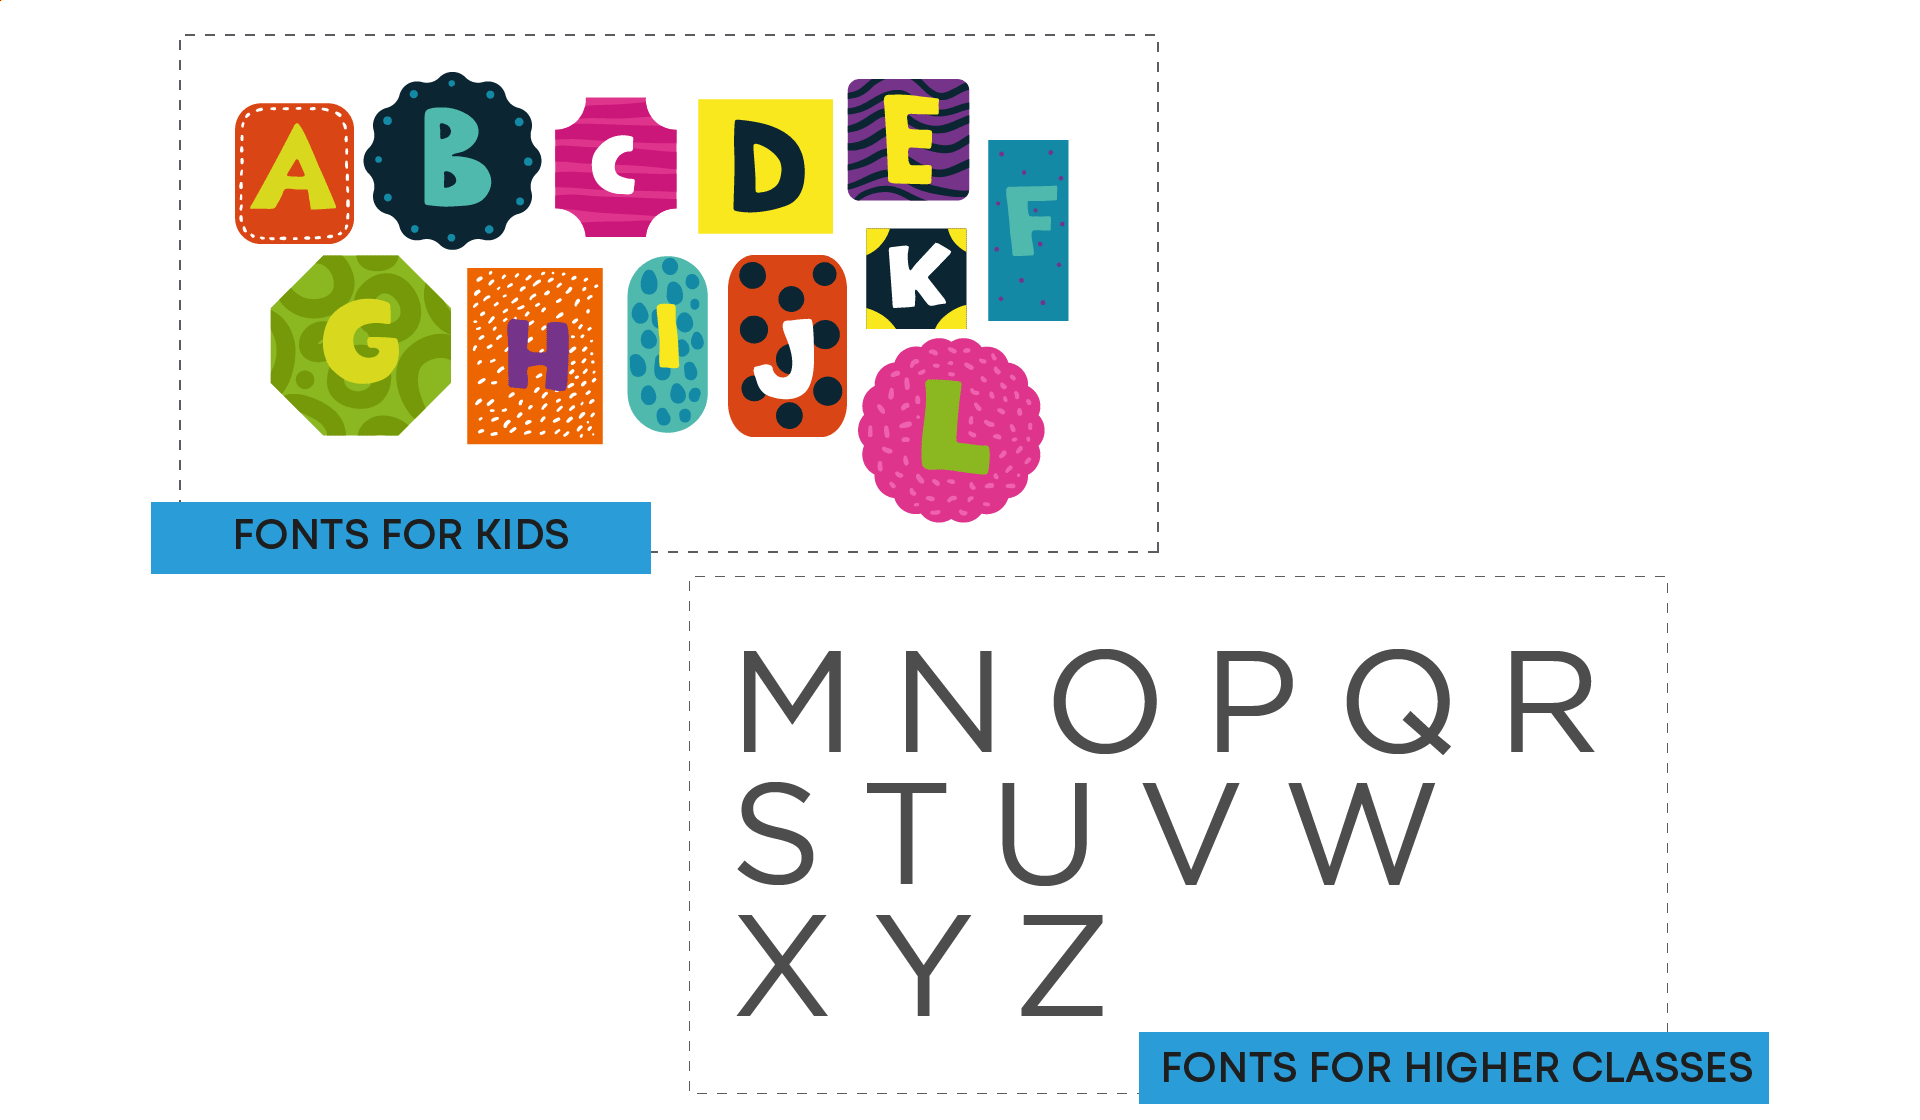 Fonts for the K-12 segment